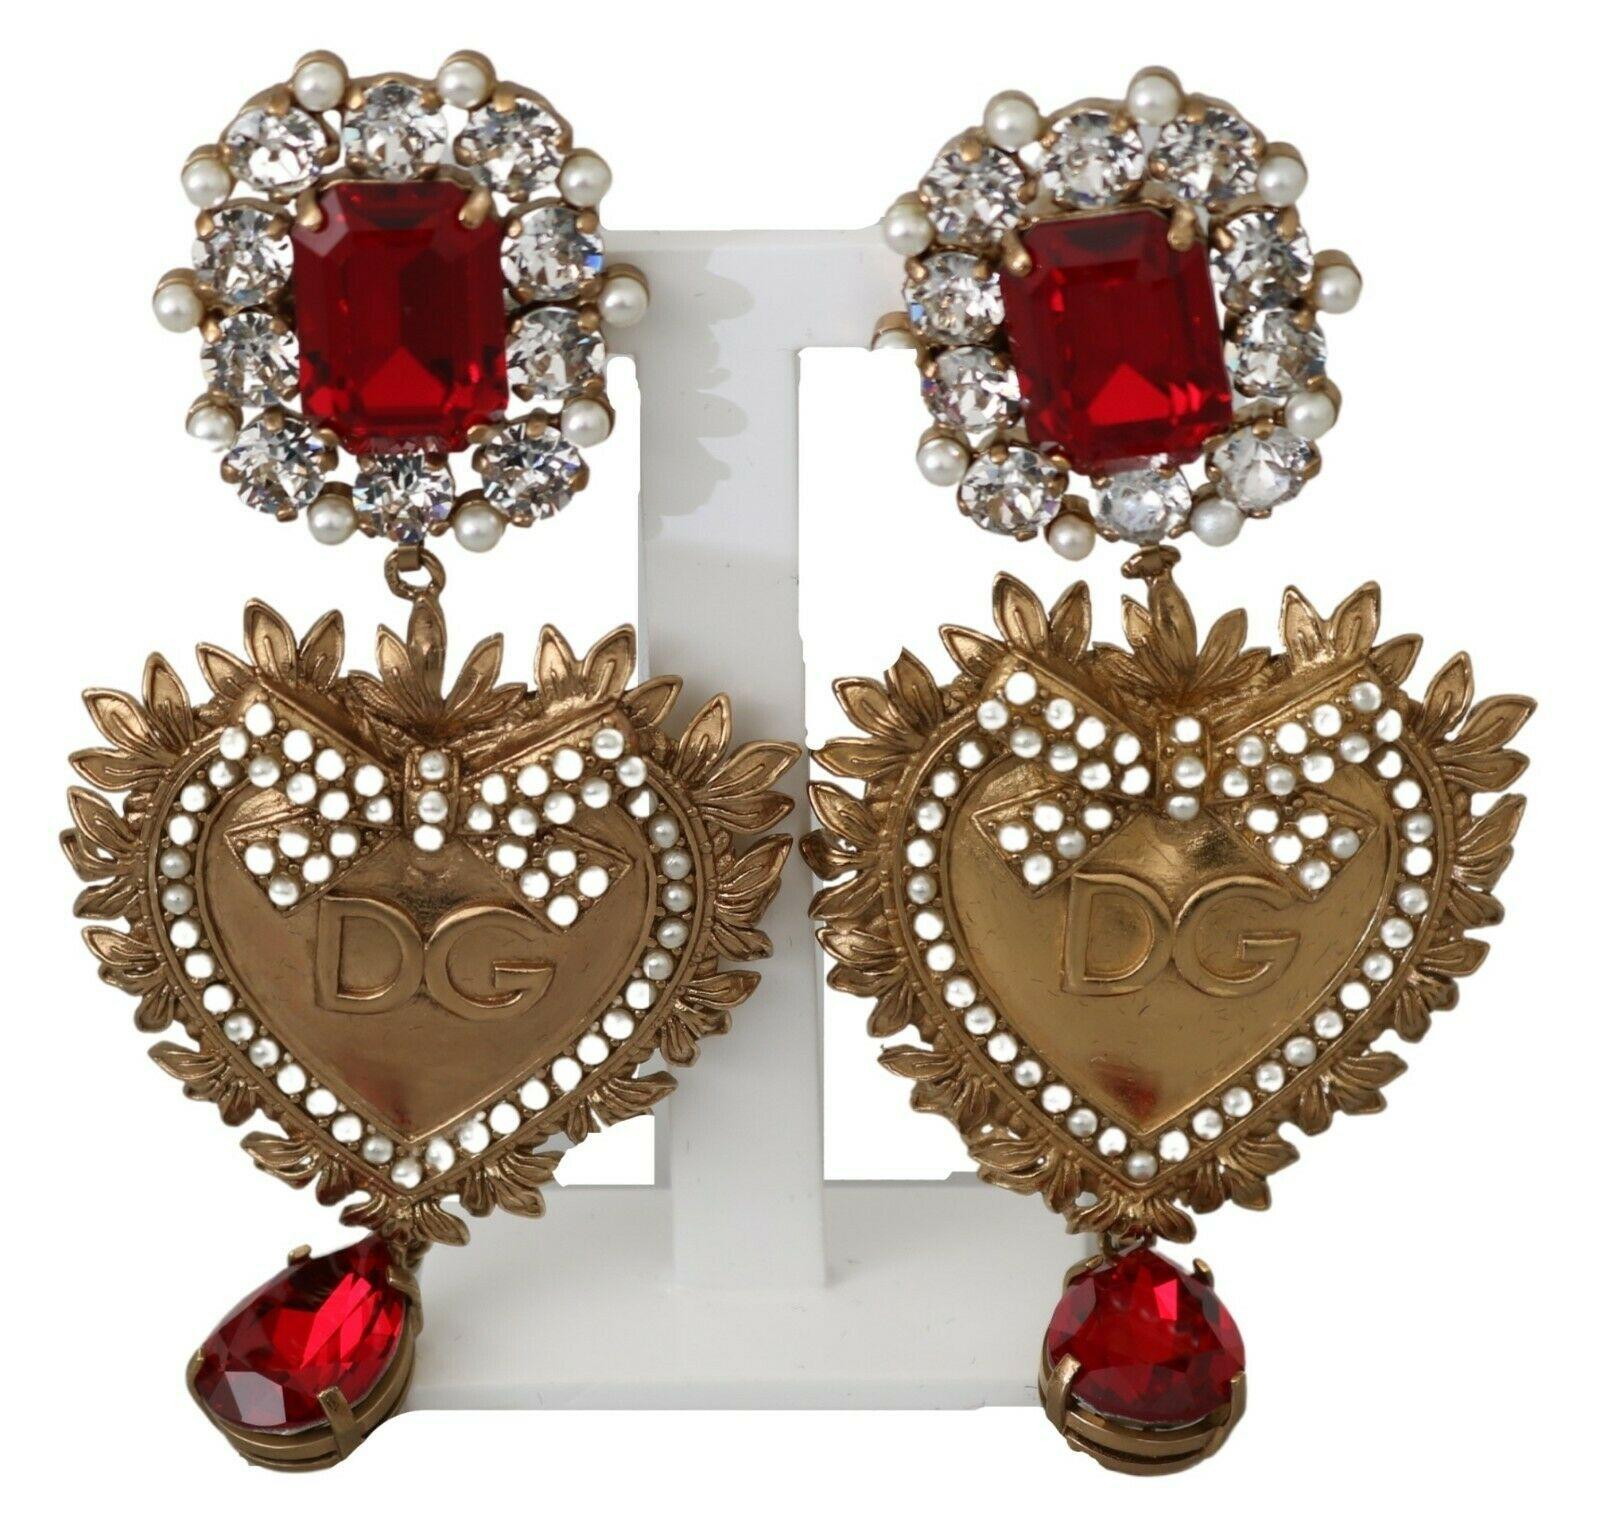  Gorgeous brand new with tags, 100% Authentic Dolce & Gabbana earrings.




Model: Clip-on, dangling
Motive: Heart
Material: 70% Brass, 30% Crystal

Color: Red, gold
Logo details
Made in Italy

Length: 10cm




Dolce & Gabbana box, original tags